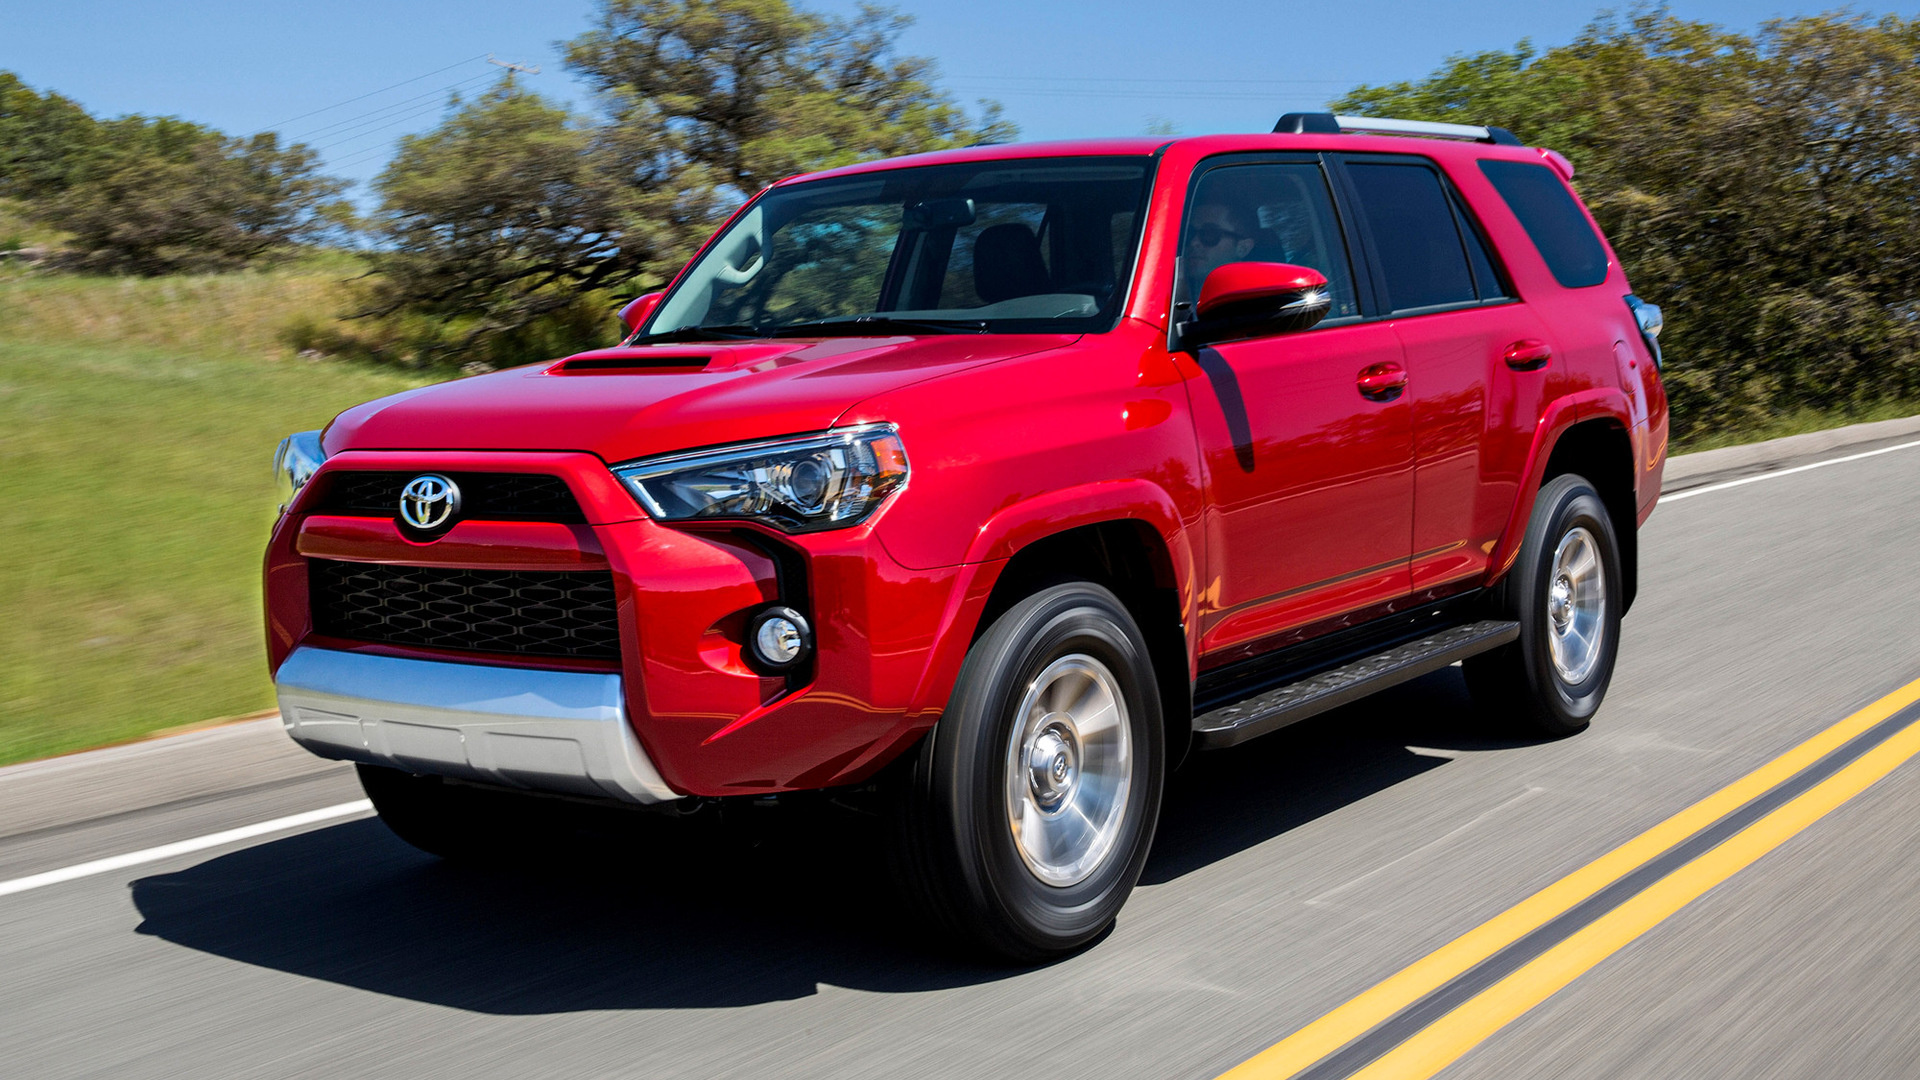 Toyota 4Runner, Trail-ready SUV, Off-road adventure, HD image collection, 1920x1080 Full HD Desktop